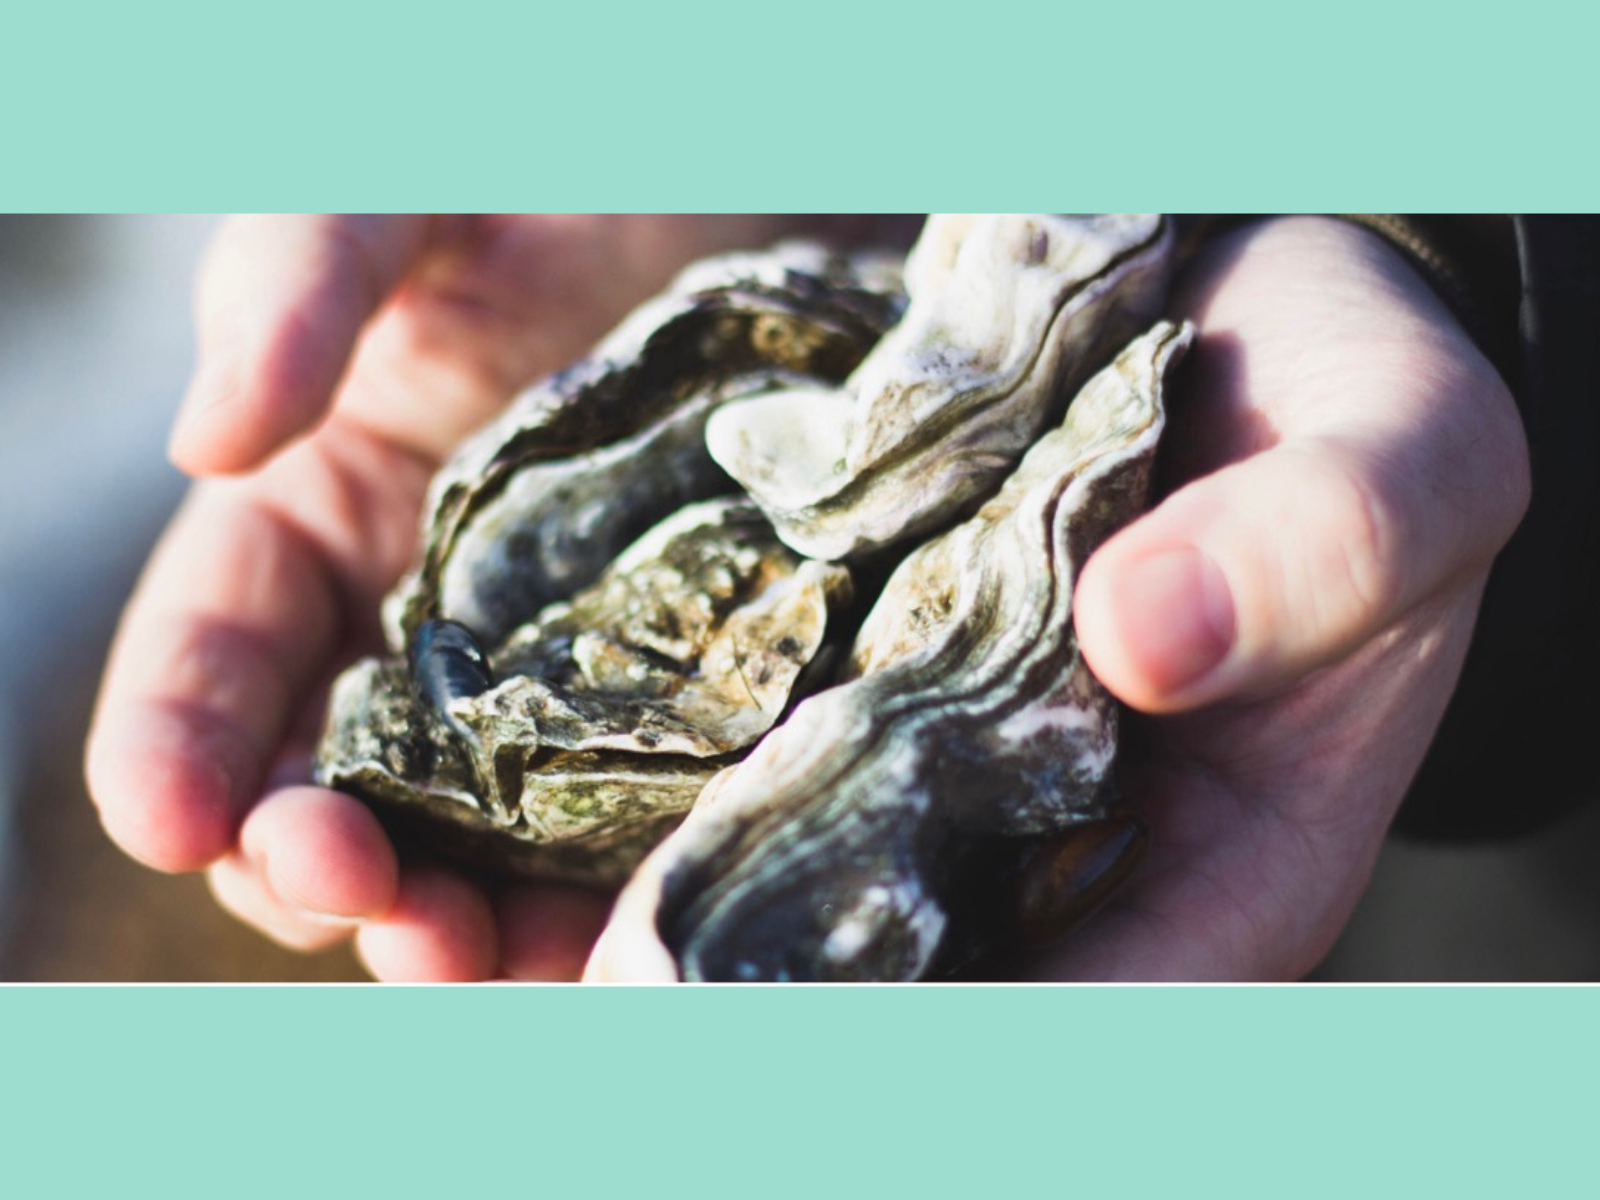 Two open hands holding three oysters